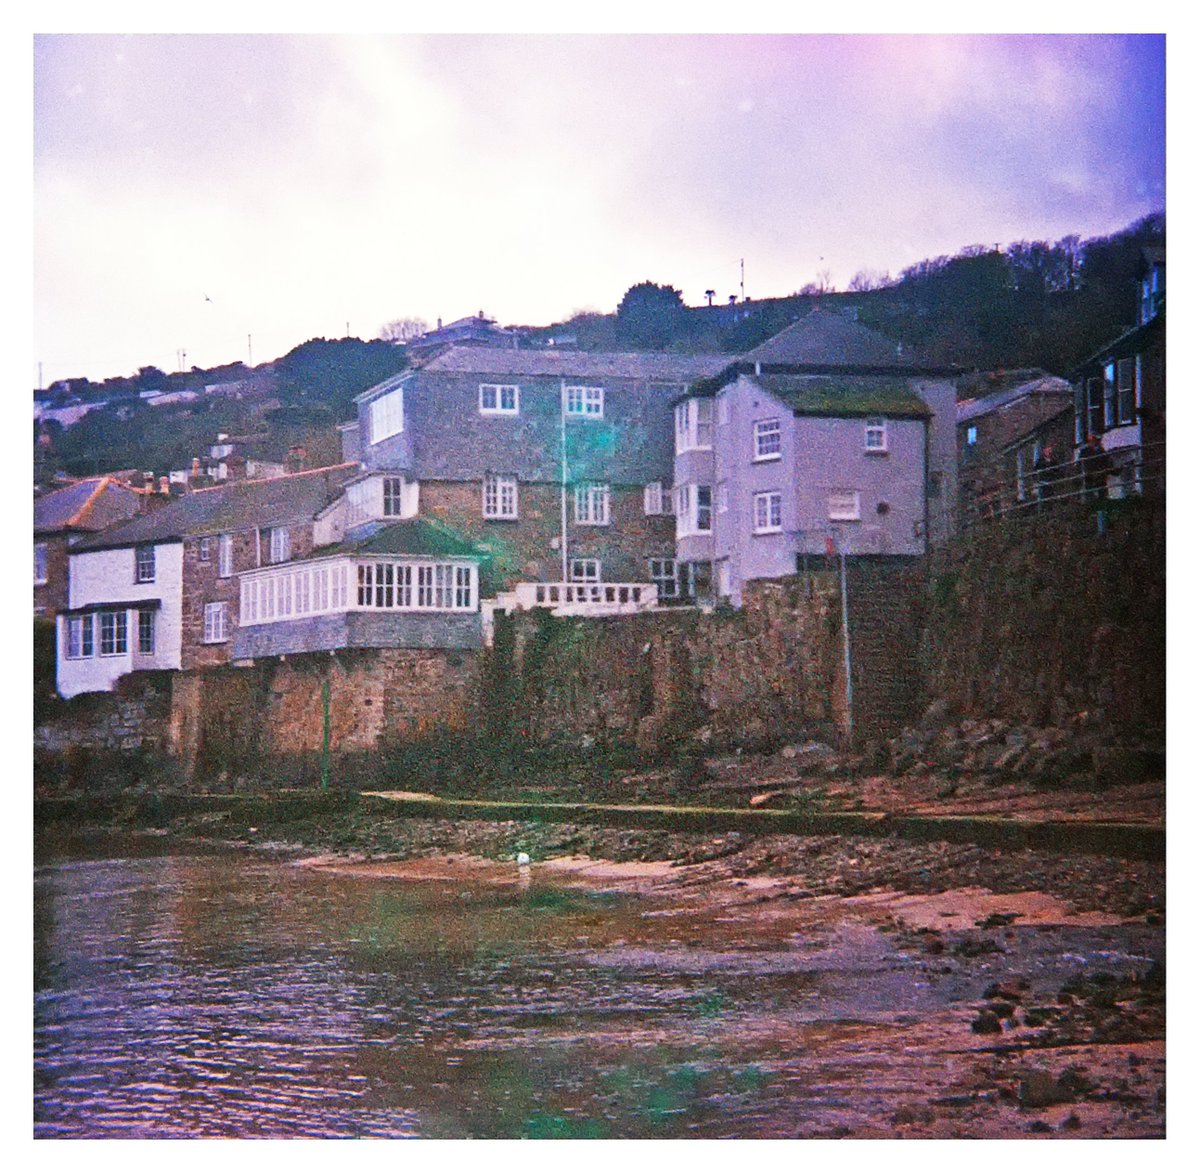 Mousehole,Cornwall 
Ilford Ilfomatic Camera, Truprint 126 film. 
Long expired film hence light leaks due to failed backing paper
  #filmphotography #filmphotography #filmisnotdead #126film #126photo #ishootfilm #cornwall #mousehole